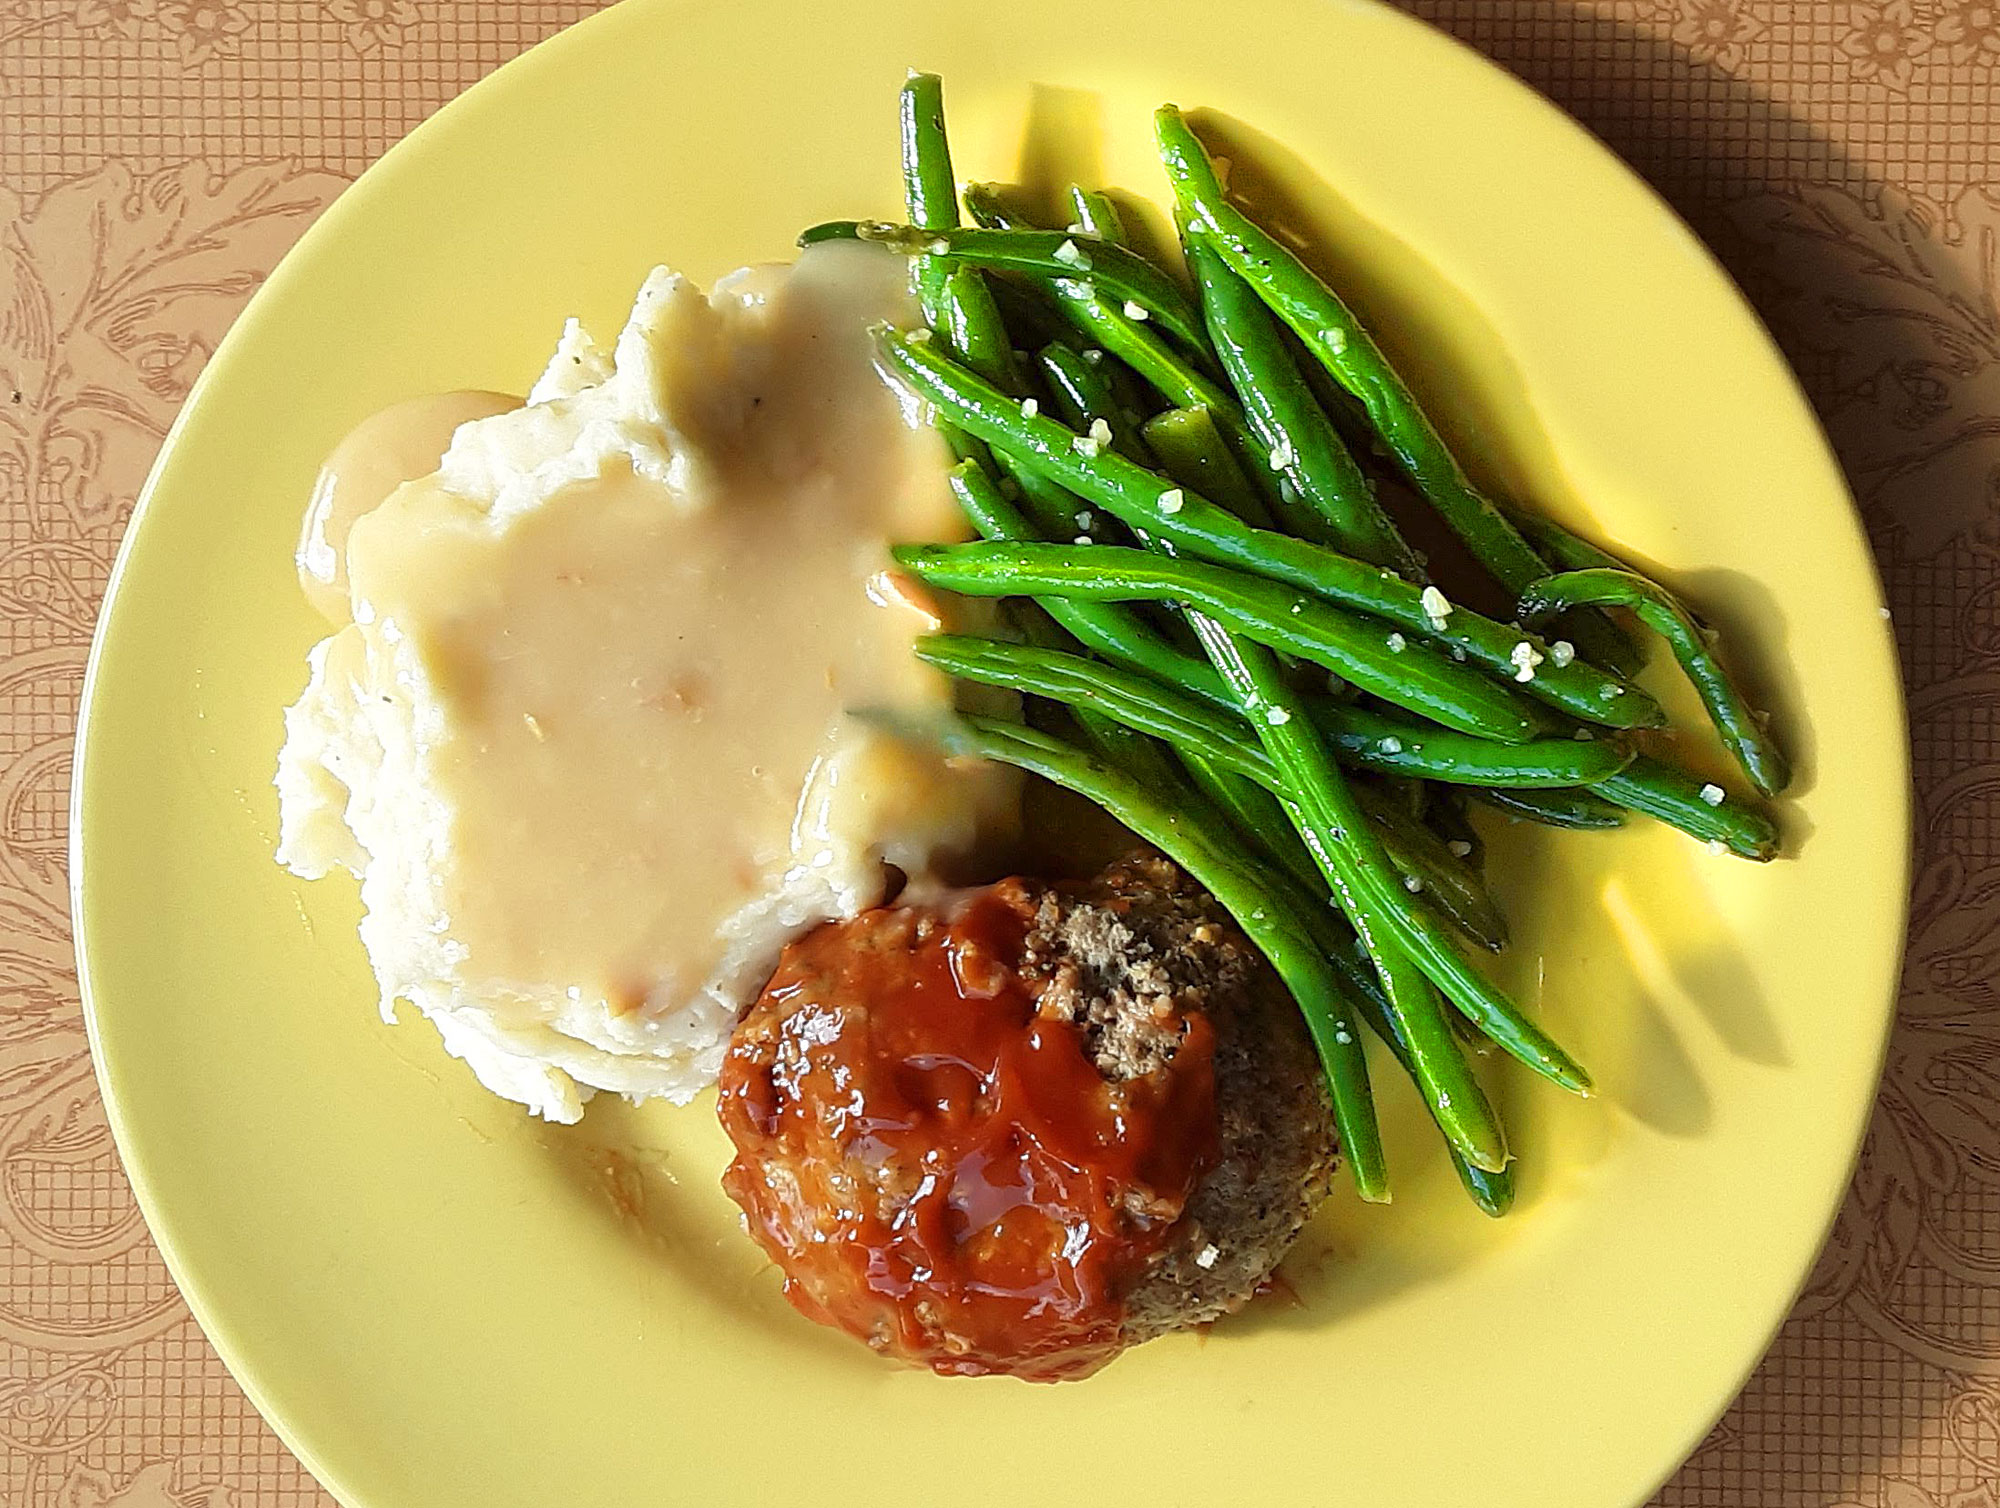 On a round, yellow plate, the author's dinner is a scoop of mashed potatoes with light gravy, many green beans topped with garlic, and a circle meatloaf. Photo by Paul Young.